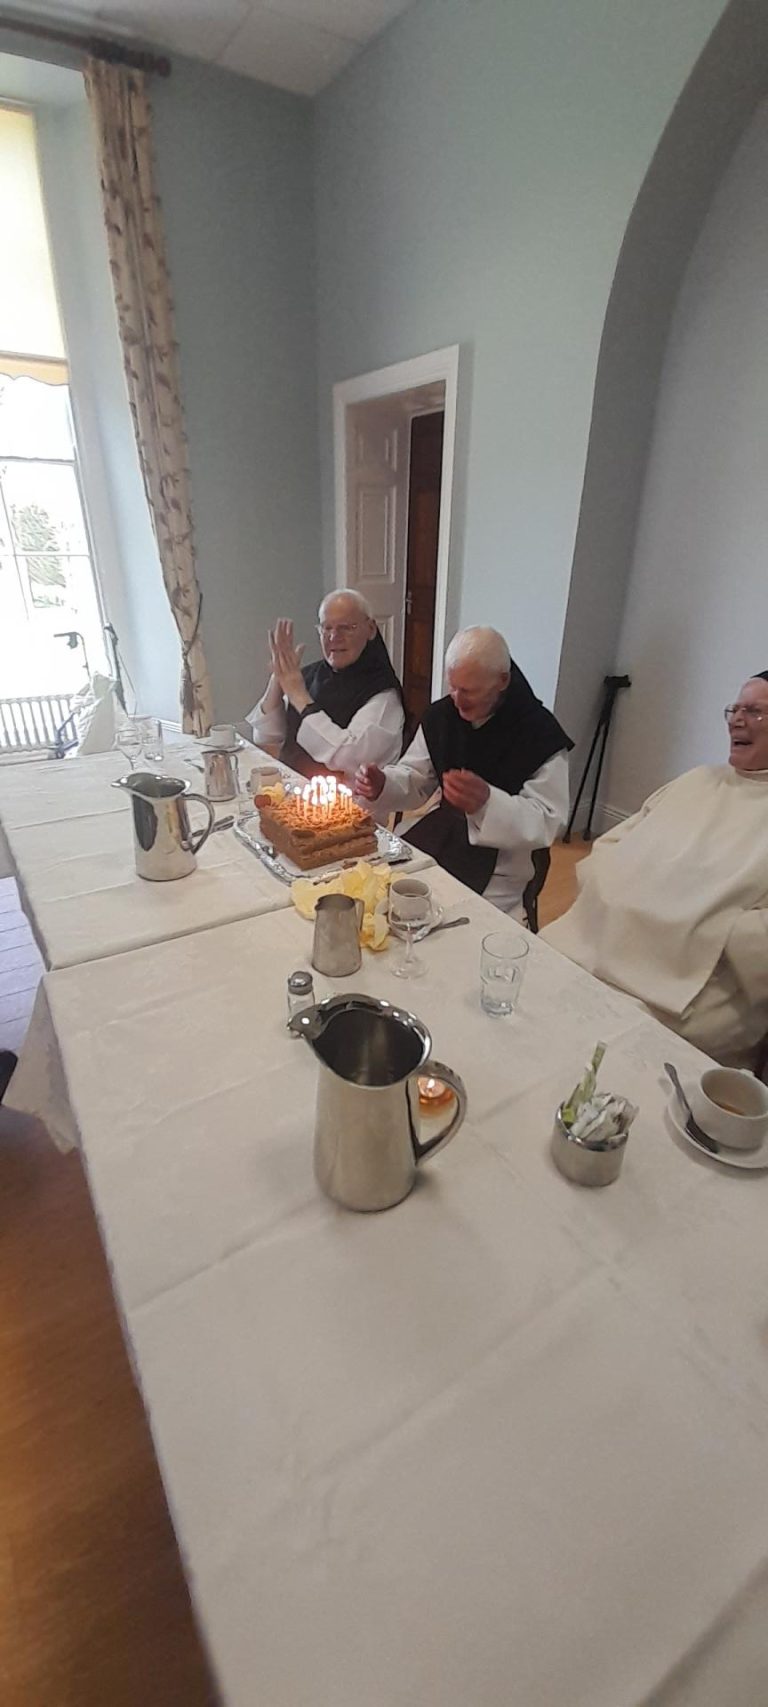 Celebrations of Dom Laurences 95th Birthday in Mount St Joseph Guest House with fellow cistercians and friends April 16th